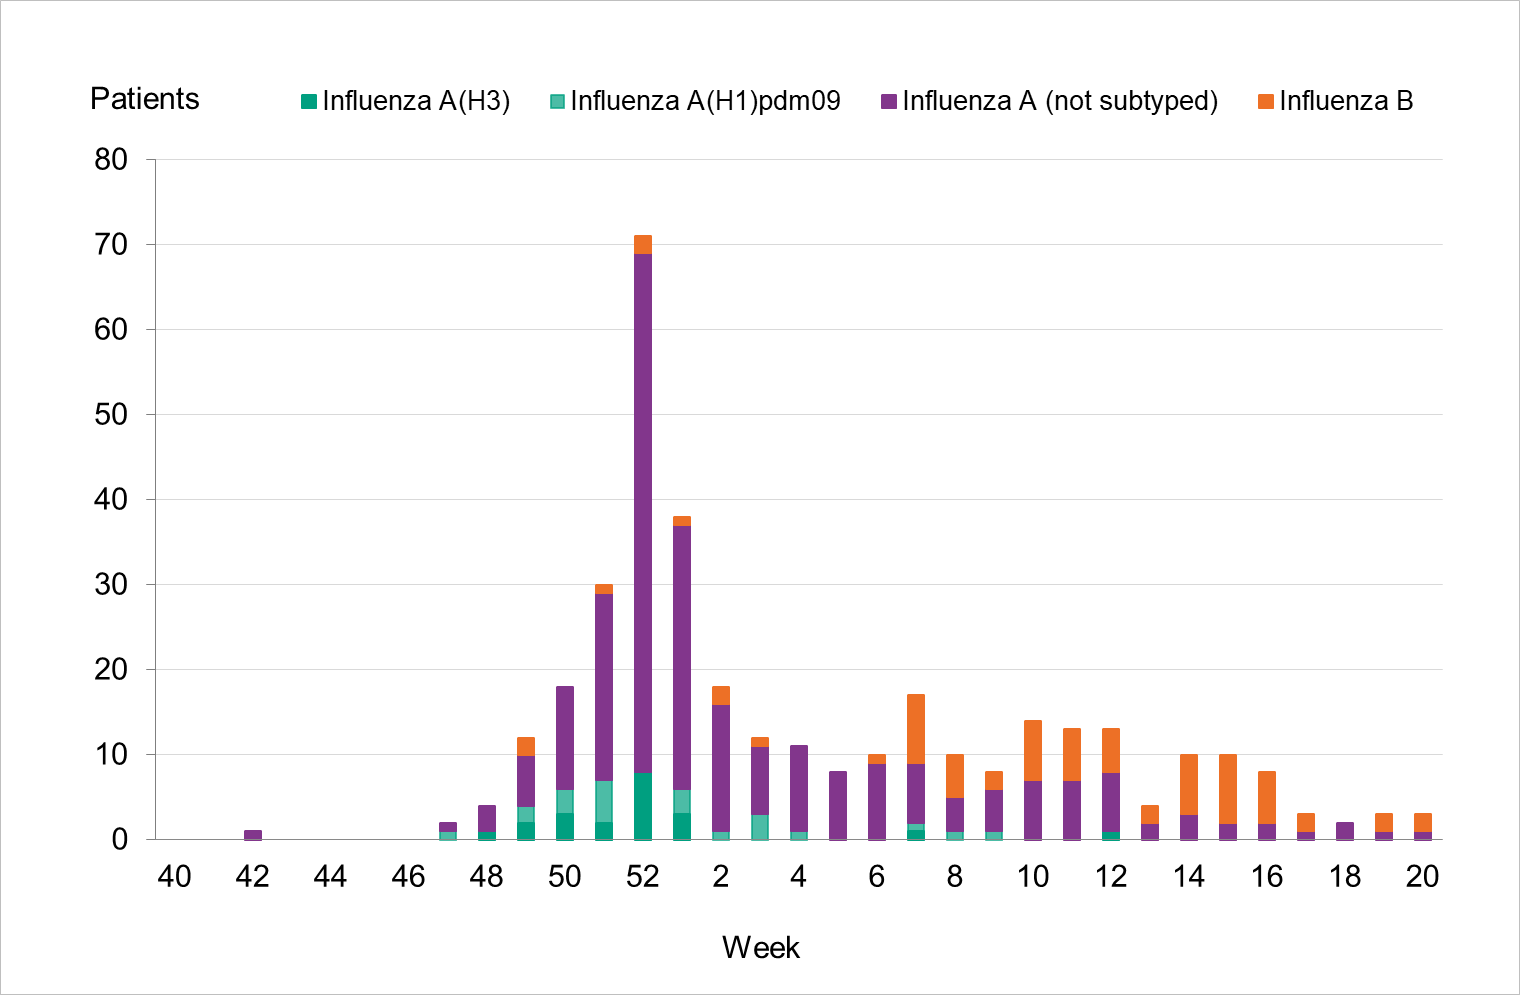 Patients in intensive care mostly have influenza A without subtype reported. During the spring, most cases have influenza B. 